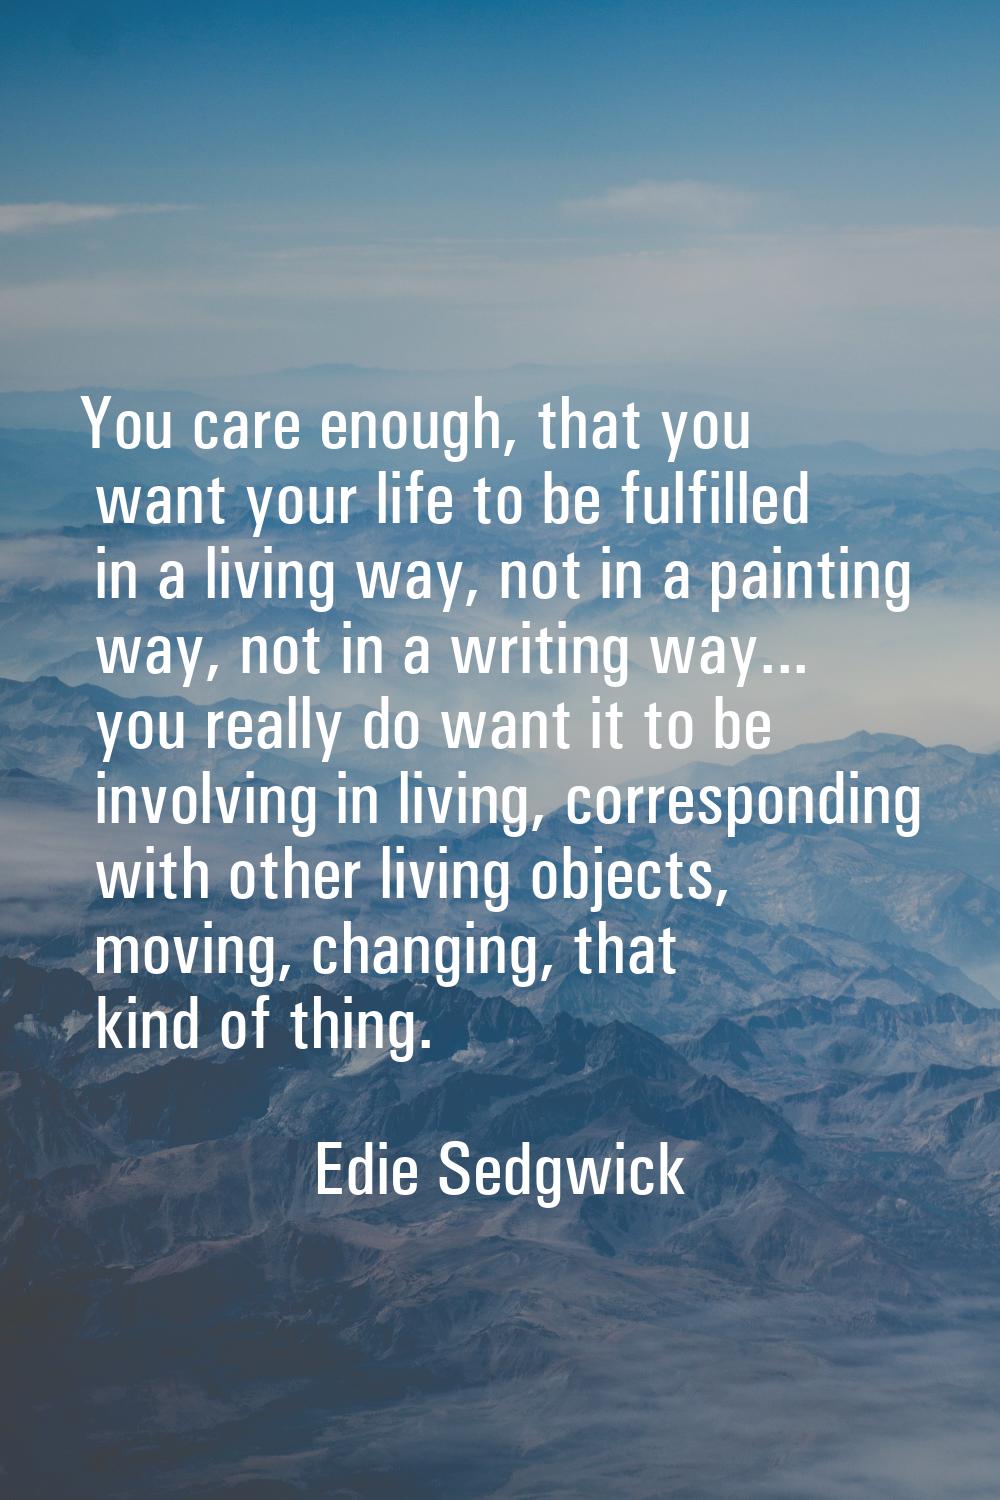 You care enough, that you want your life to be fulfilled in a living way, not in a painting way, no